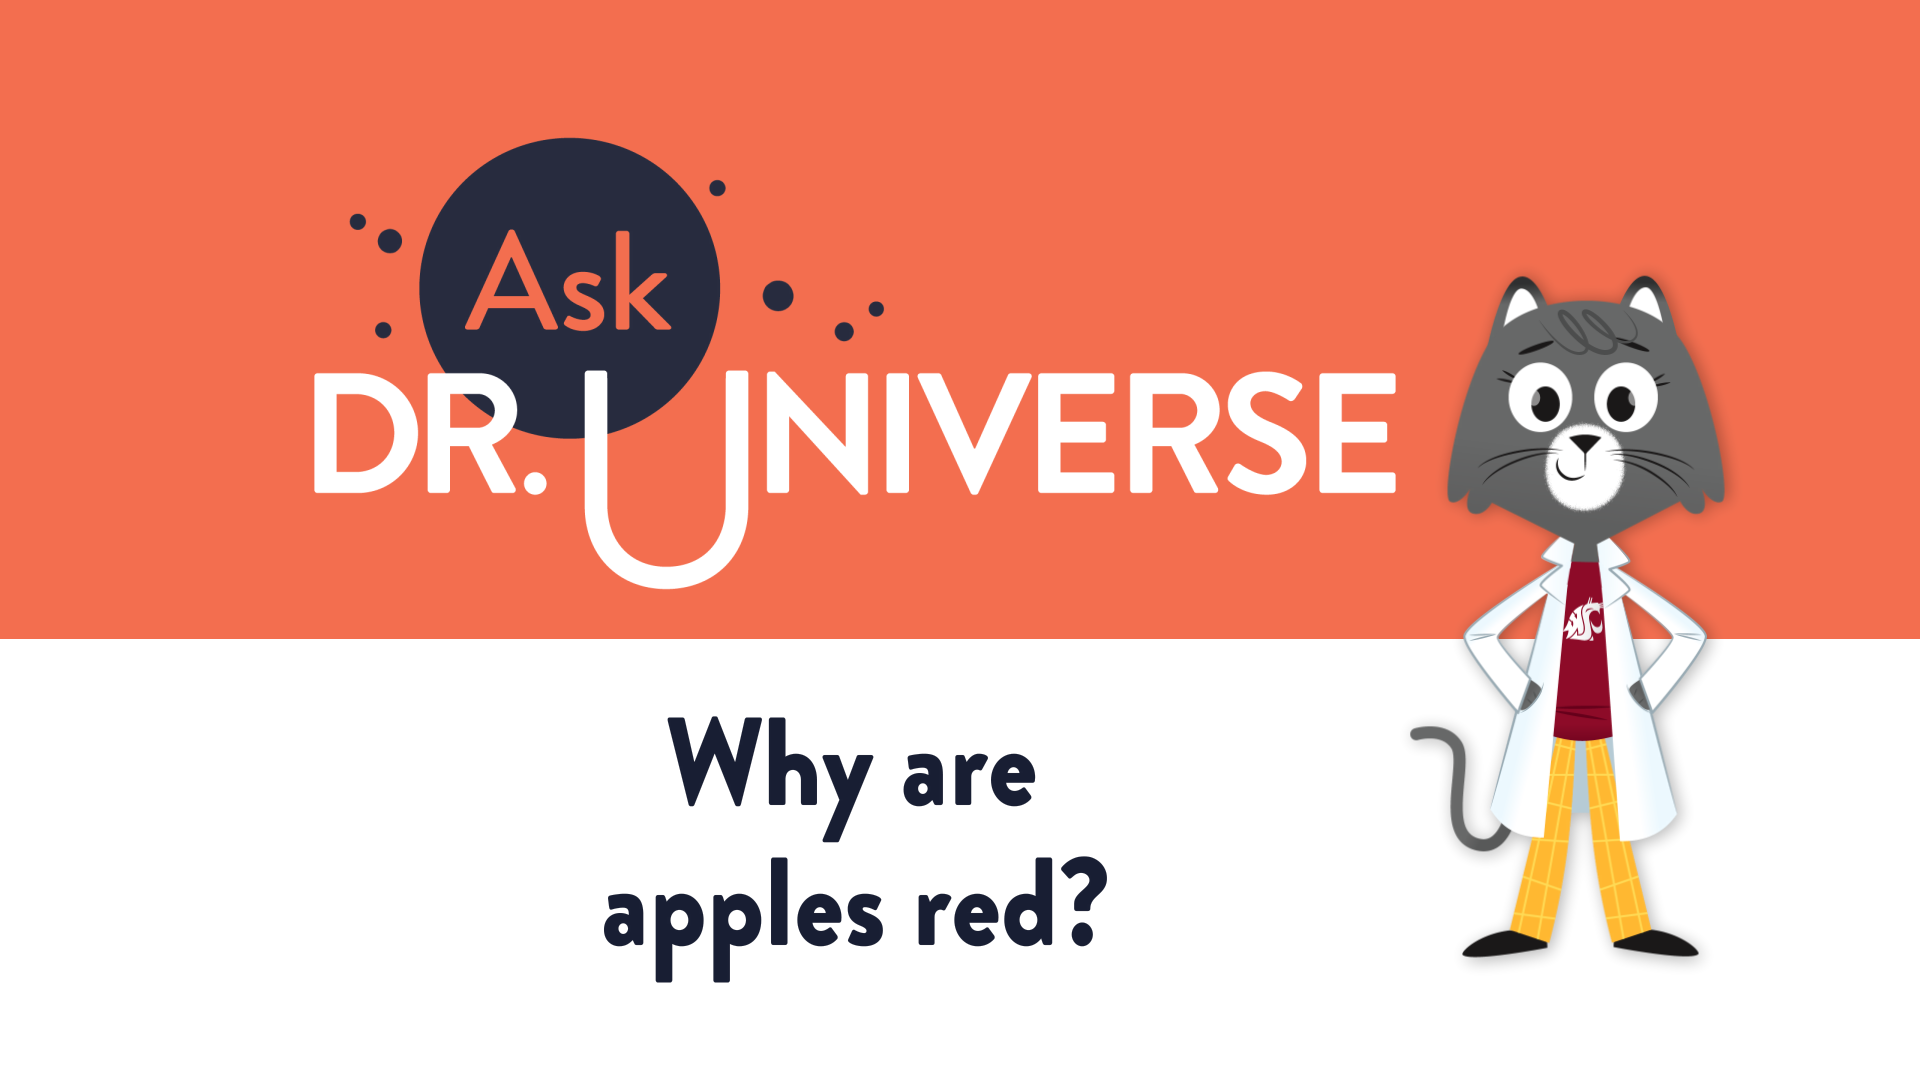 Why are apples red? - Full Screen